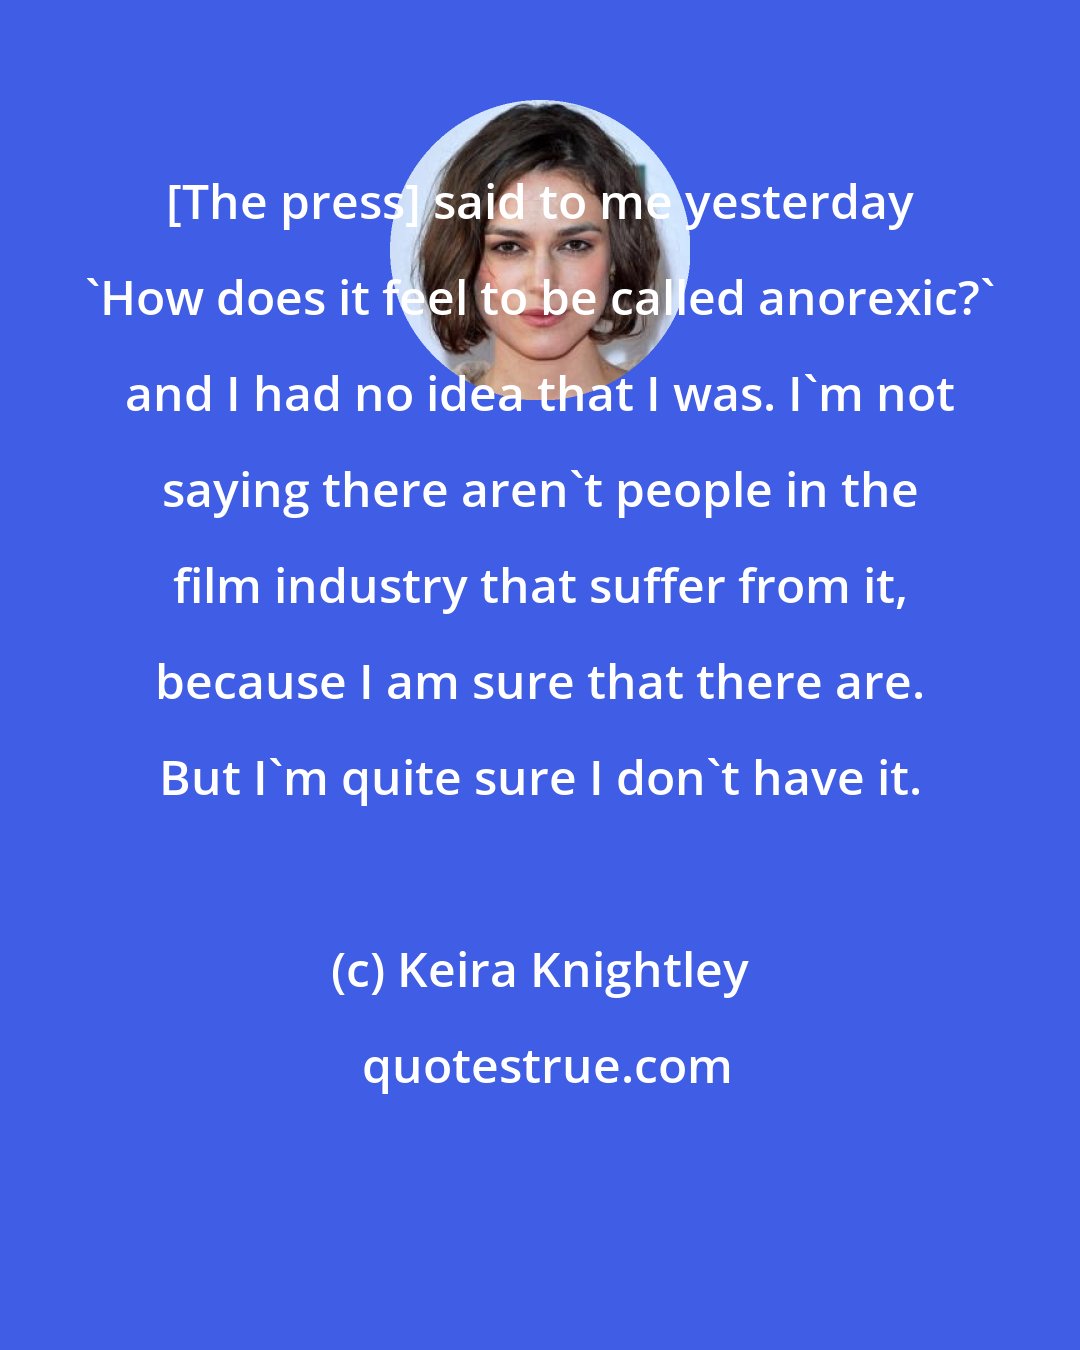 Keira Knightley: [The press] said to me yesterday 'How does it feel to be called anorexic?' and I had no idea that I was. I'm not saying there aren't people in the film industry that suffer from it, because I am sure that there are. But I'm quite sure I don't have it.